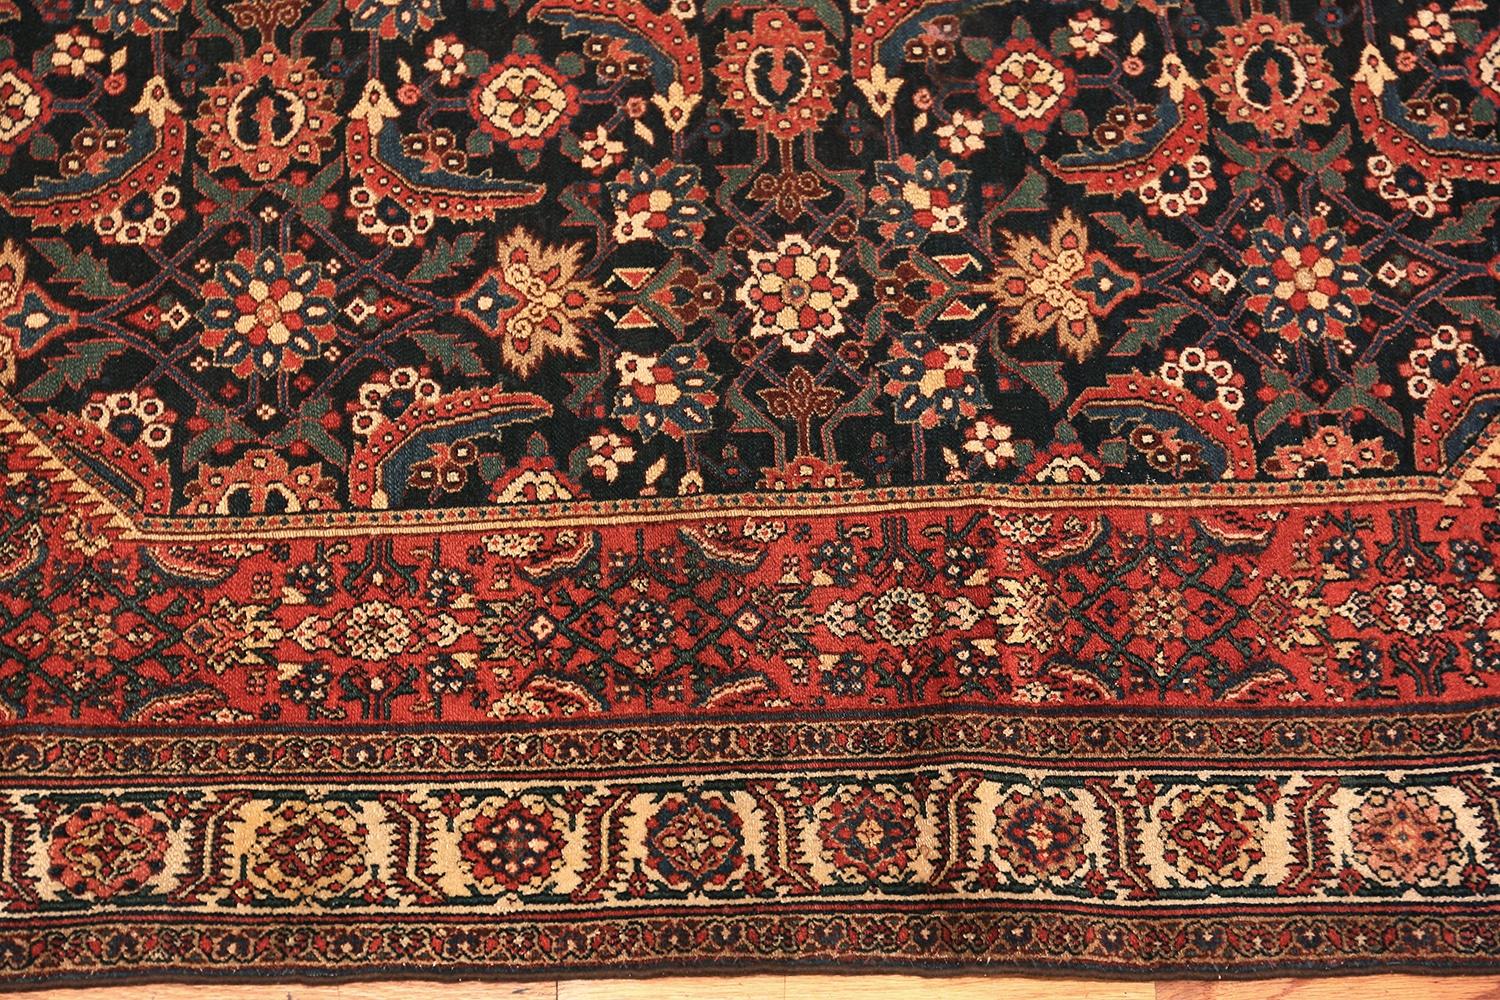 Spectacular antique Persian Mishan Malayer rug, rug type / country of origin: Persian rugs, date: circa 1900. Size: 4 ft x 6 ft 4 in (1.22 m x 1.93 m). This magnificent Mishan Malayer rug from around the turn of the century is a rare find.